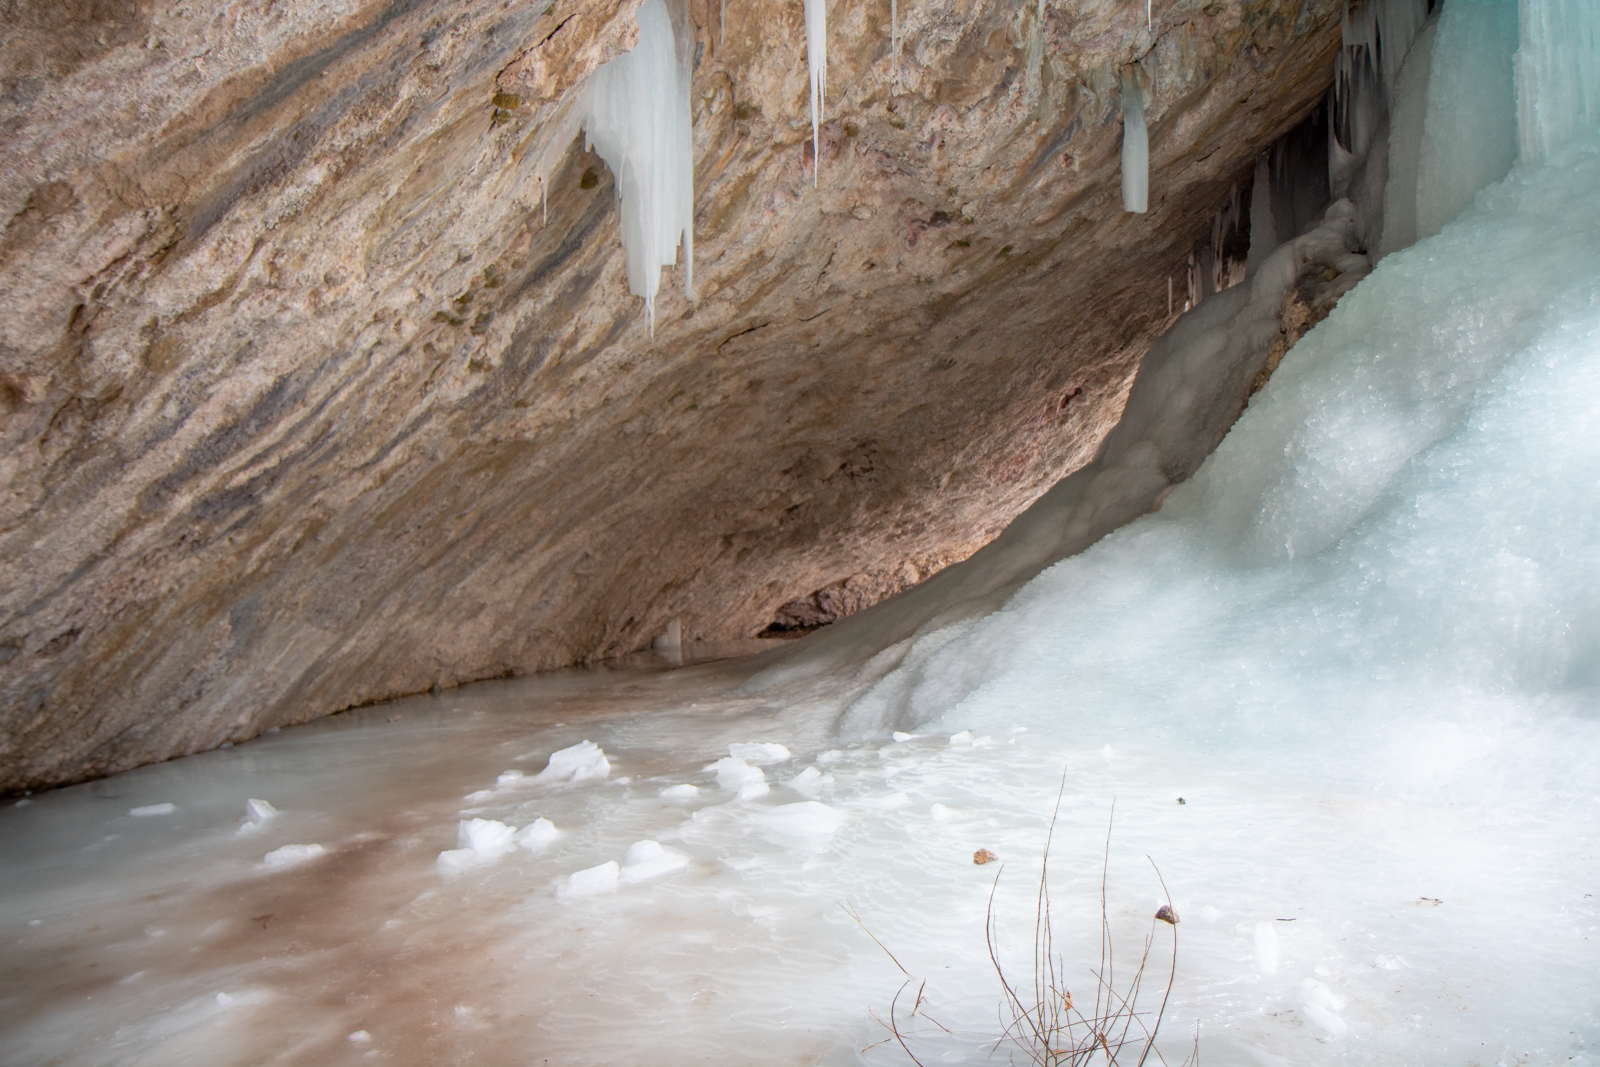 Ice Caves in Rifle Mountain Park Colorado